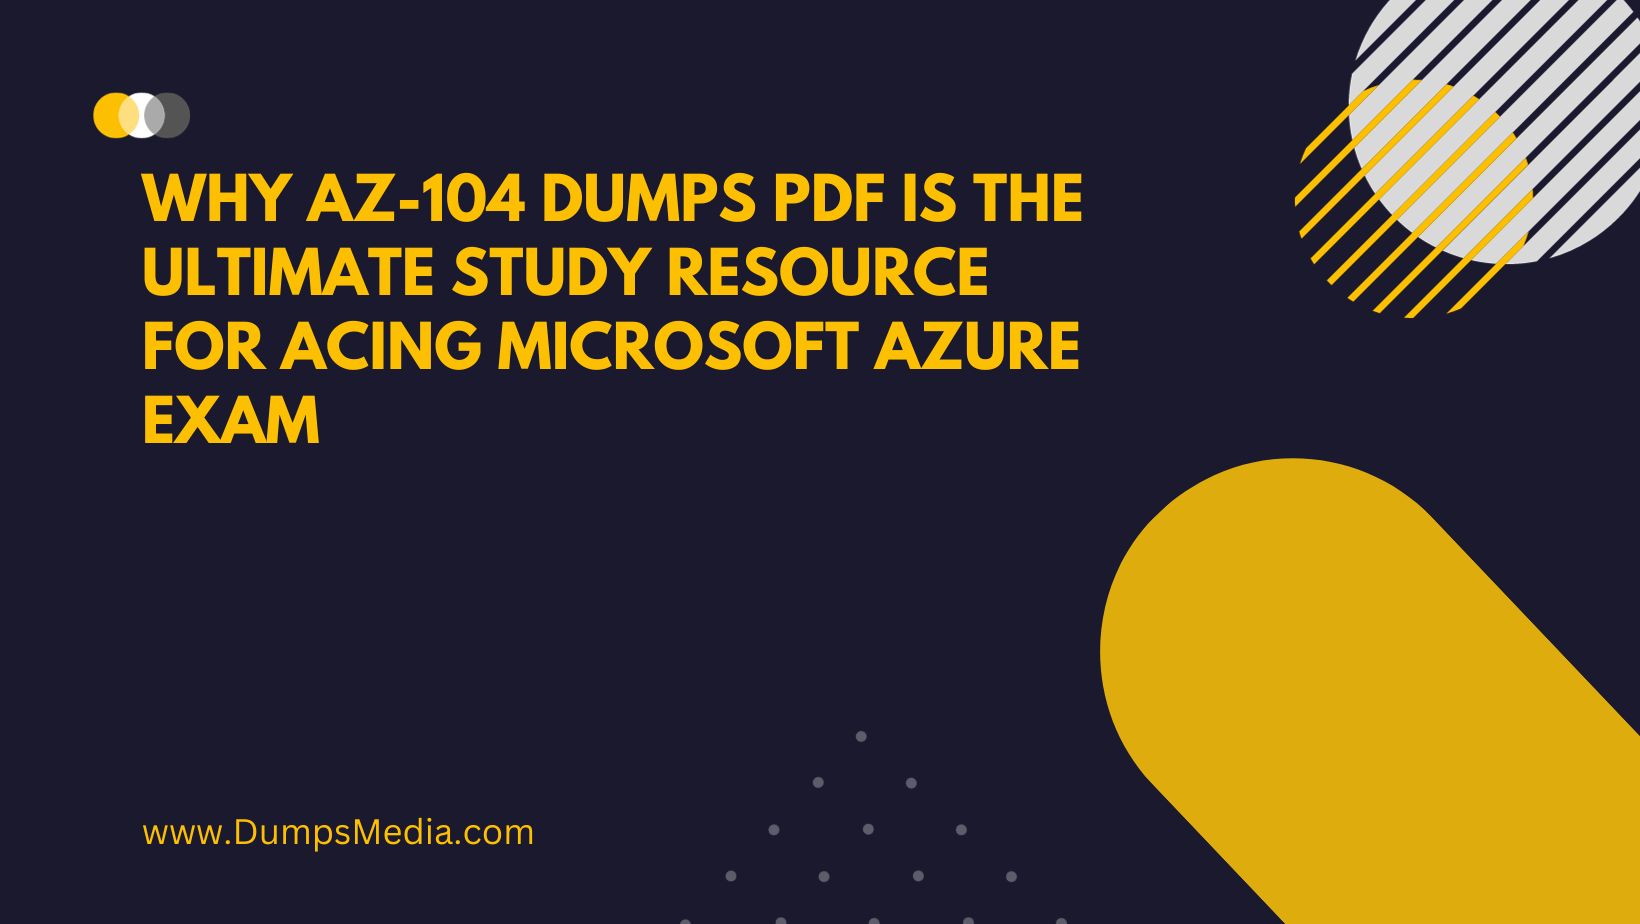 Why AZ-104 Dumps PDF is the Ultimate Study Resource for Acing Microsoft Azure Exam